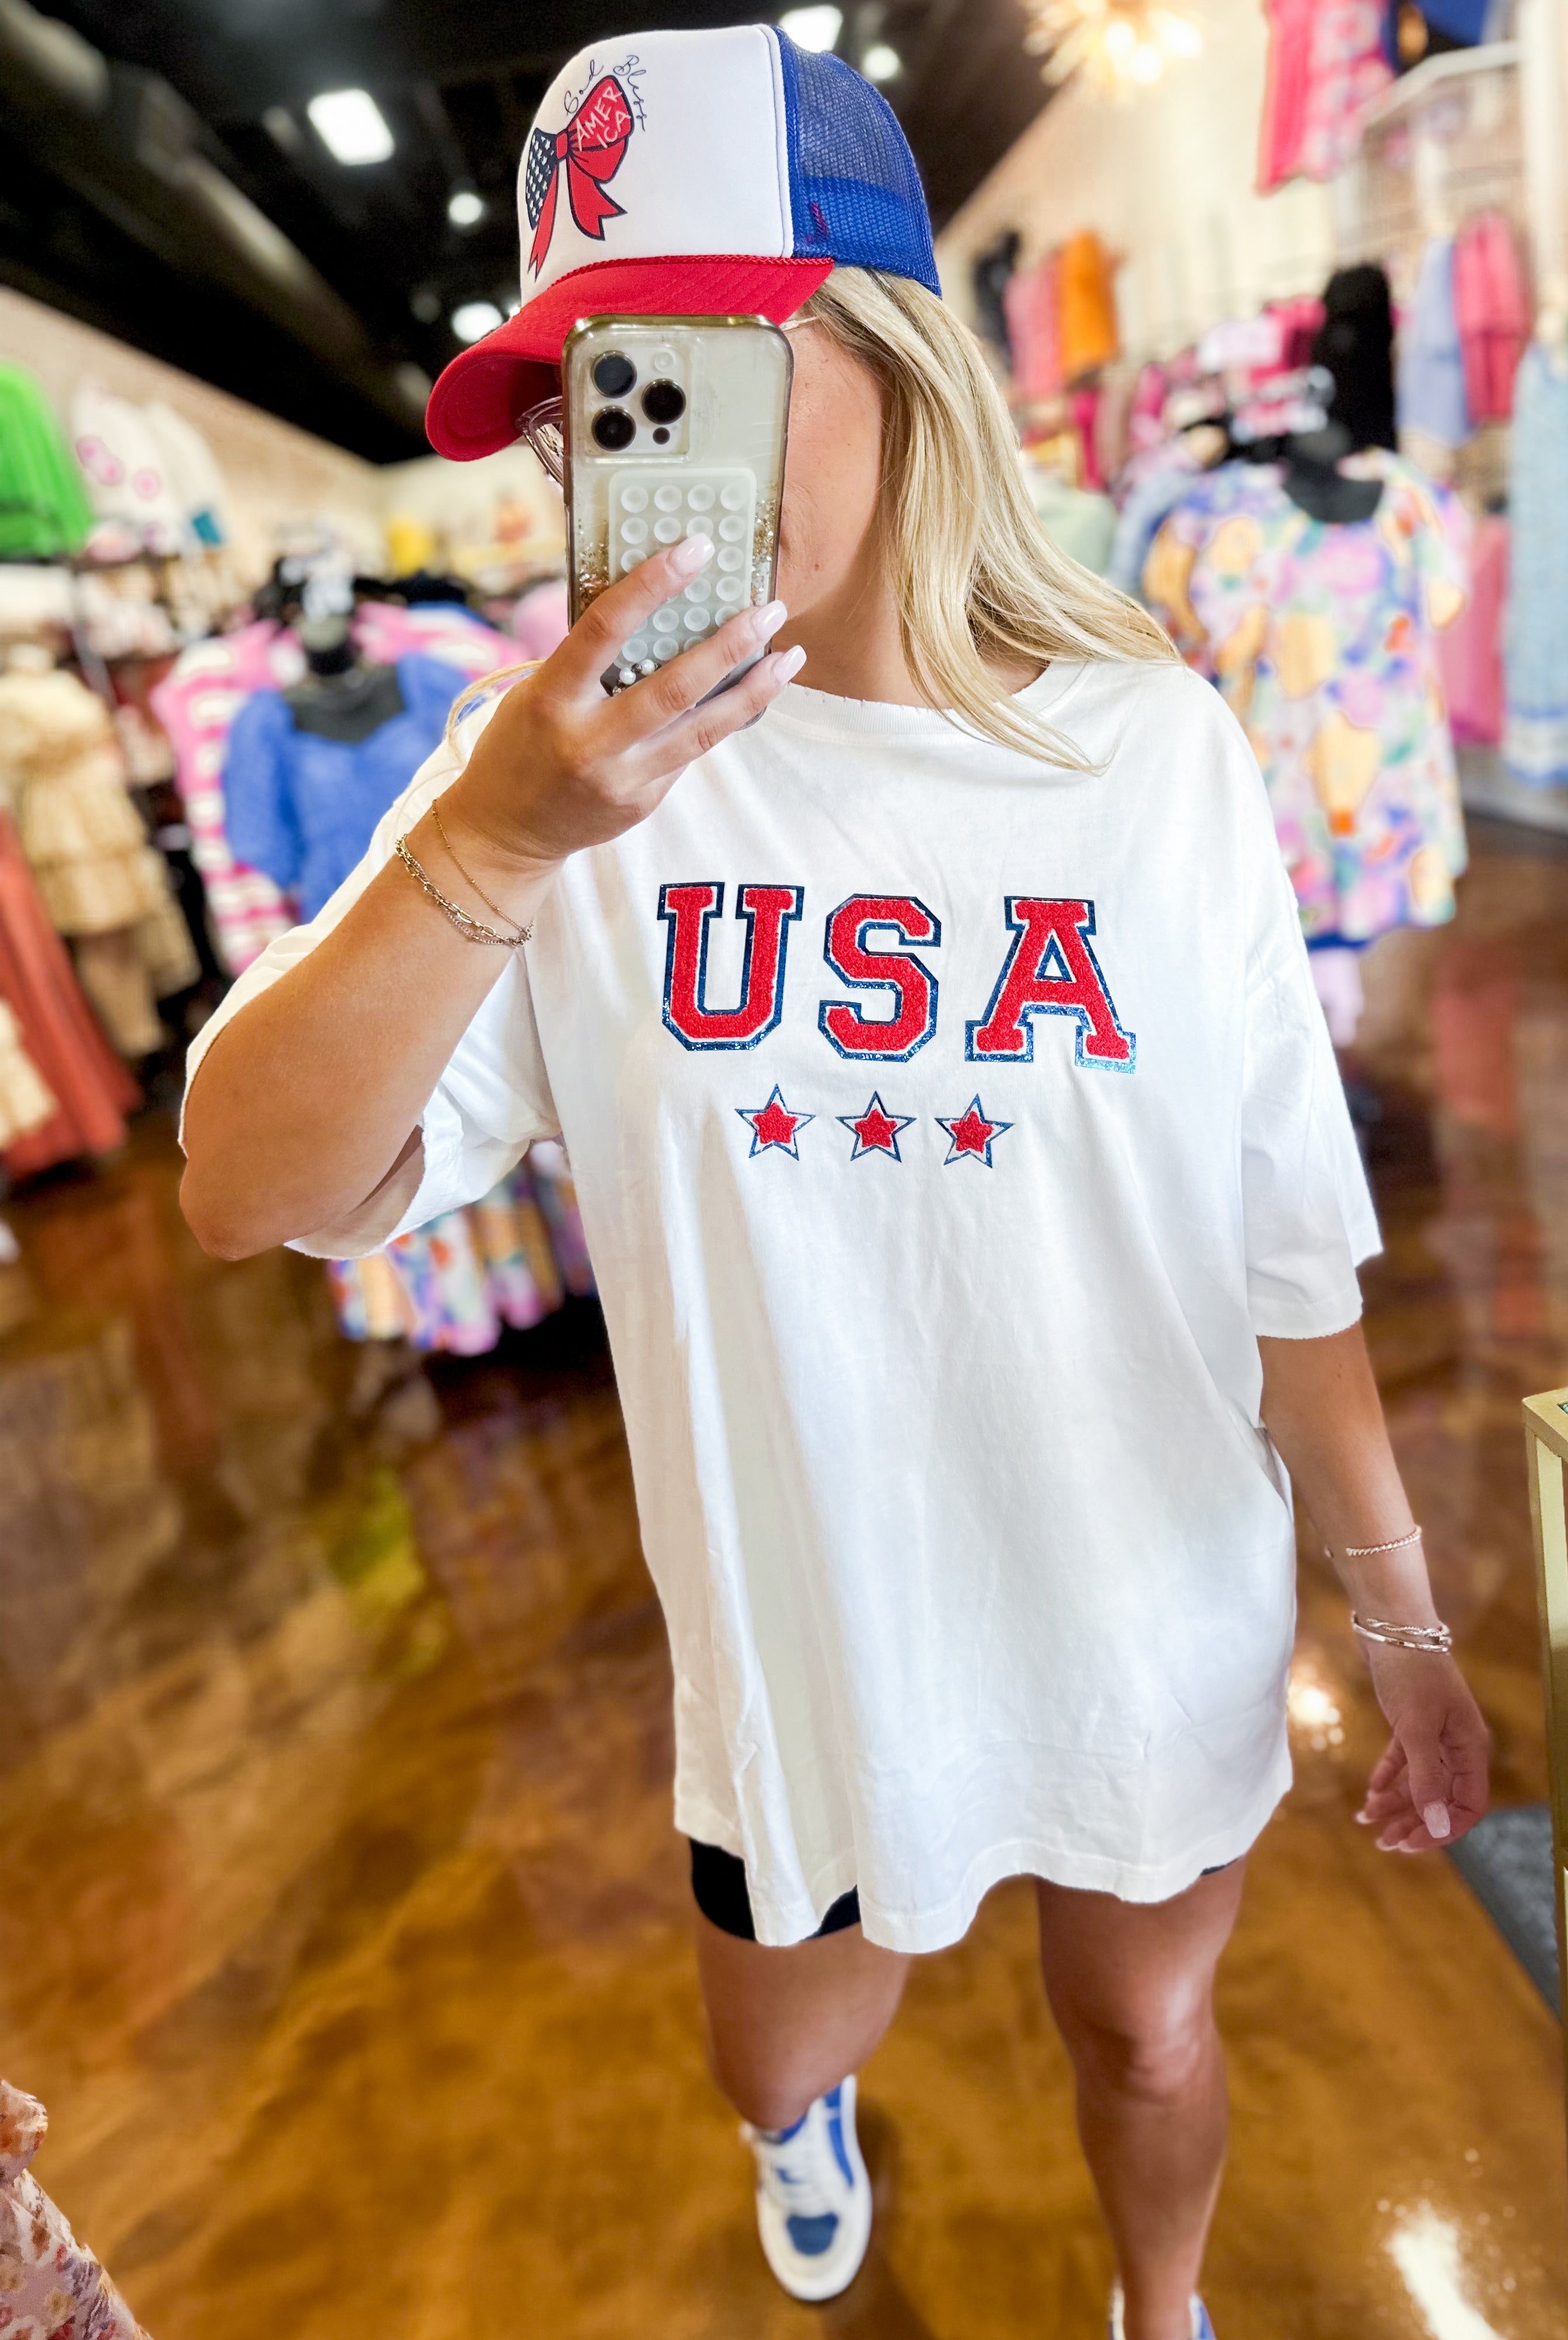 USA Stars Glitter Patch Short Sleeve Graphic Tee - Be You Boutique